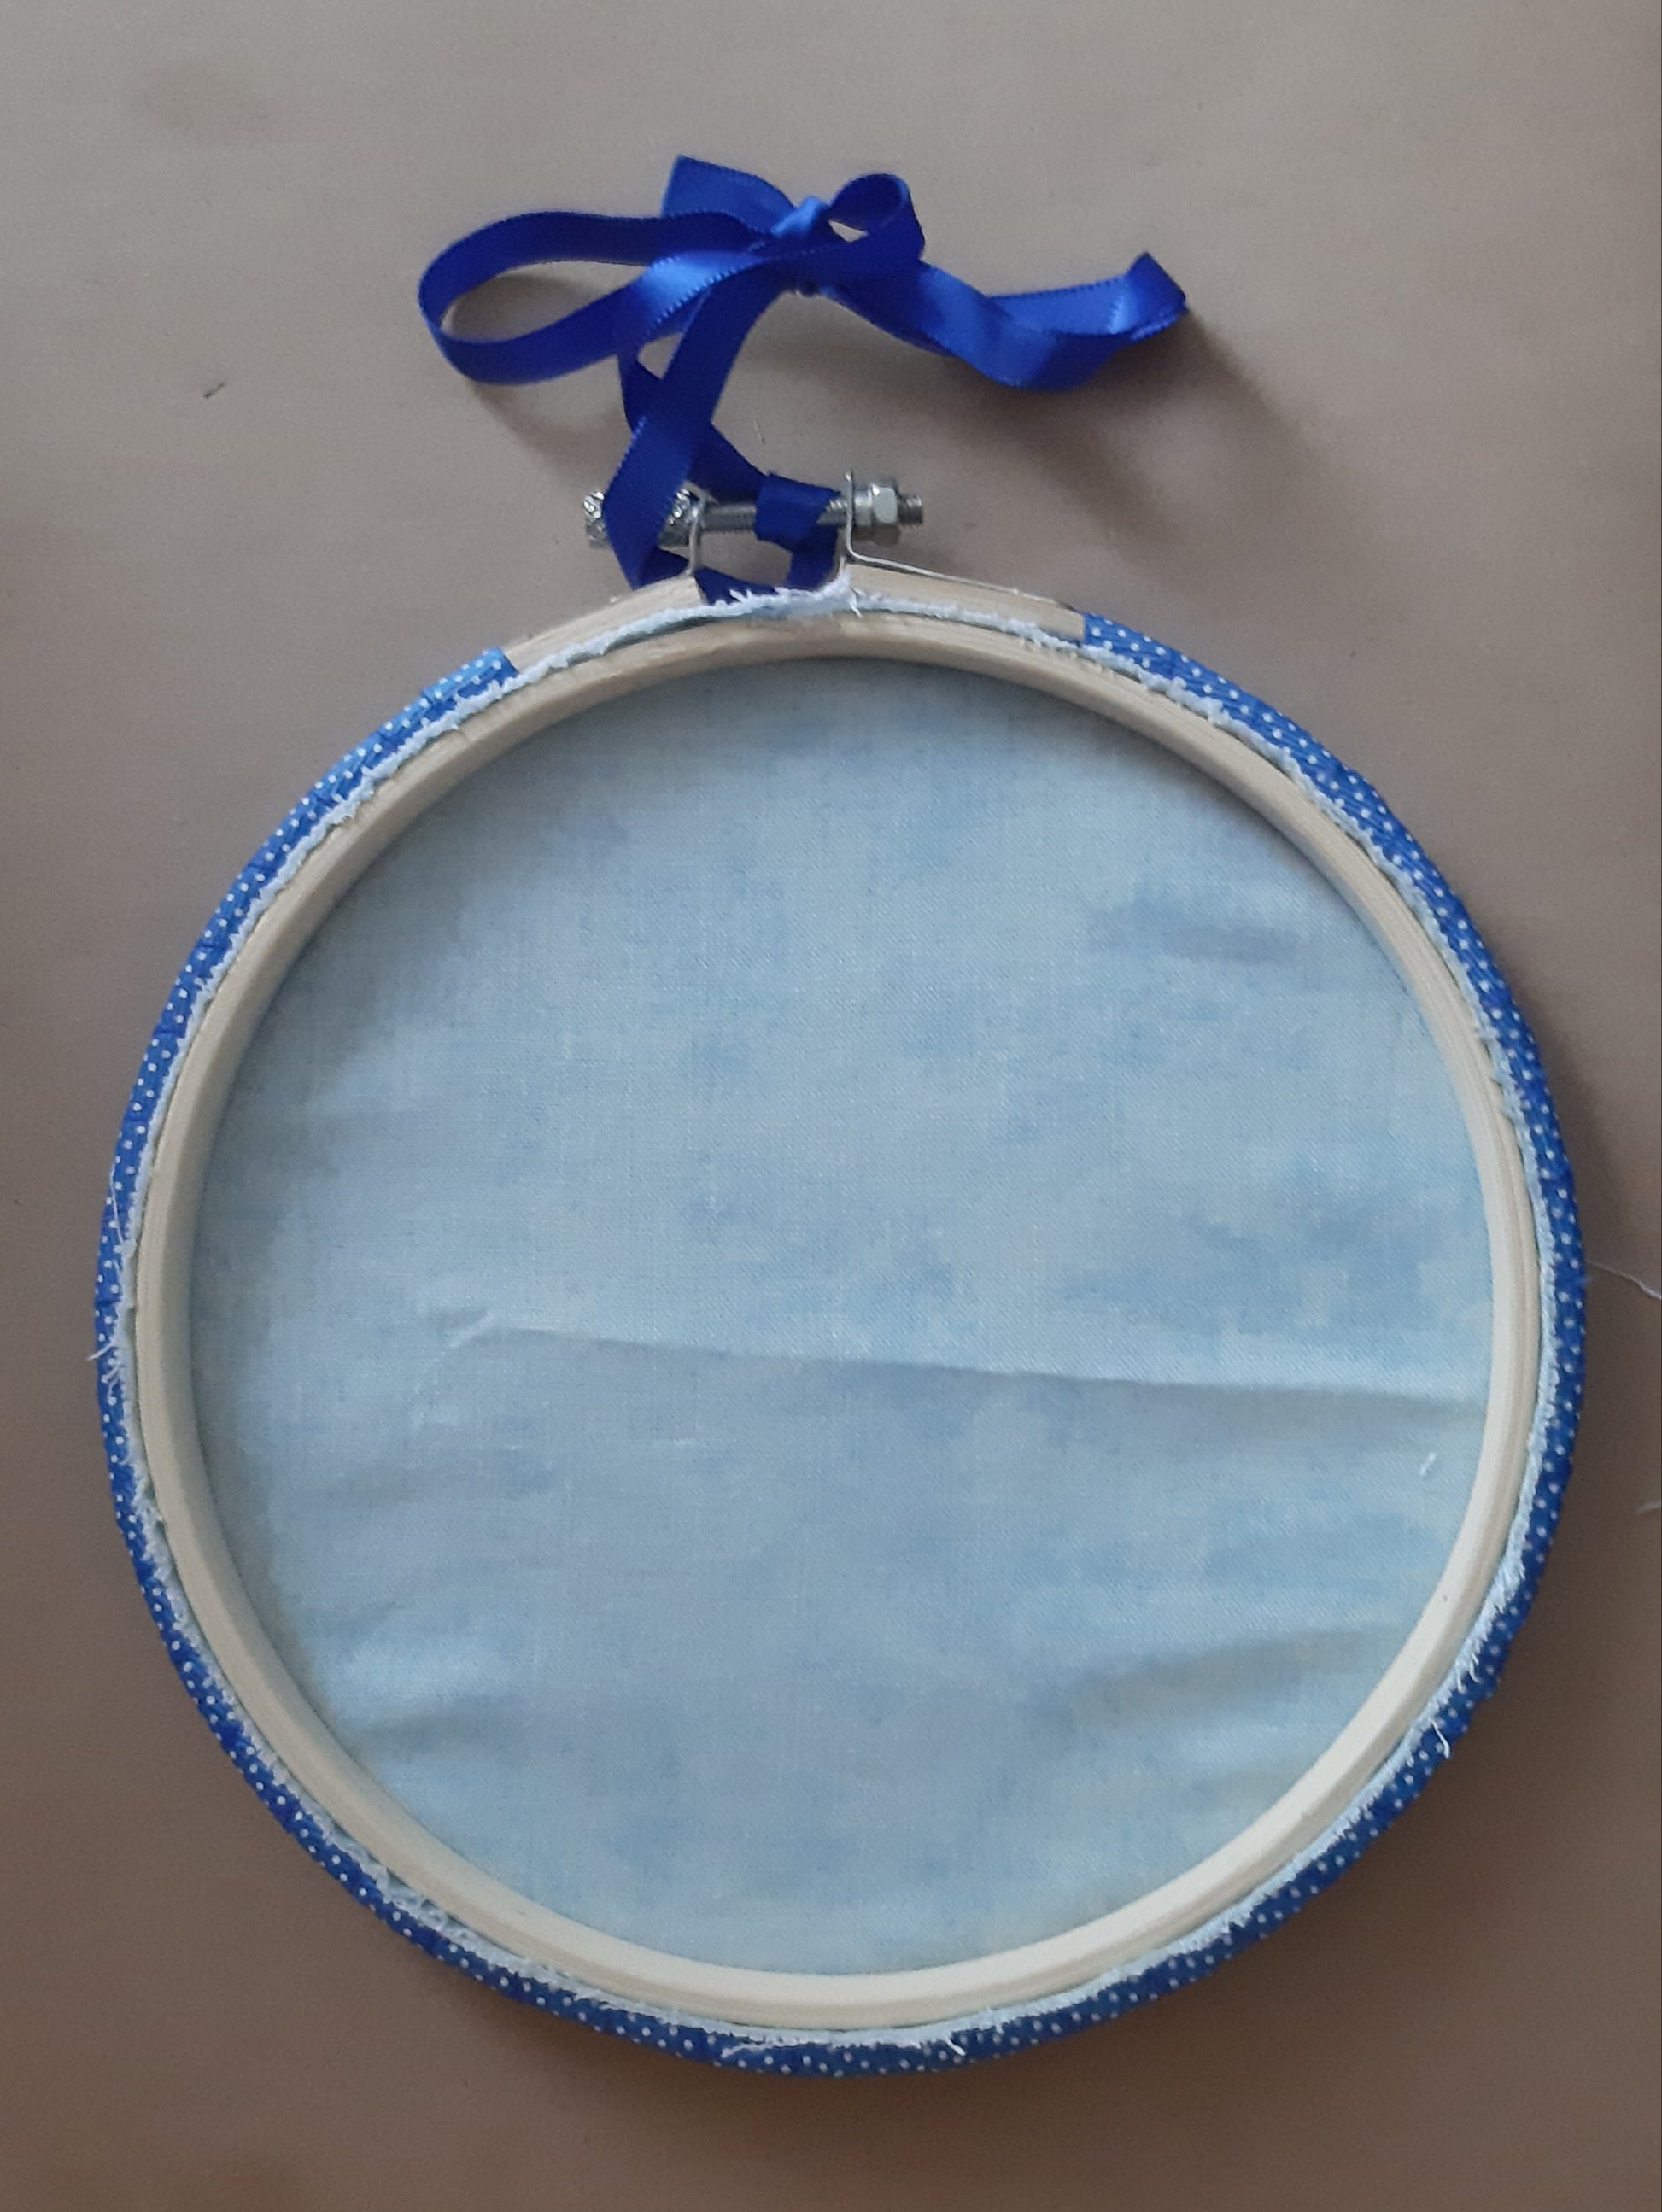 6 inch embroidery hoop is backed in light blue cotton with hoop wrapped in blue ribbon